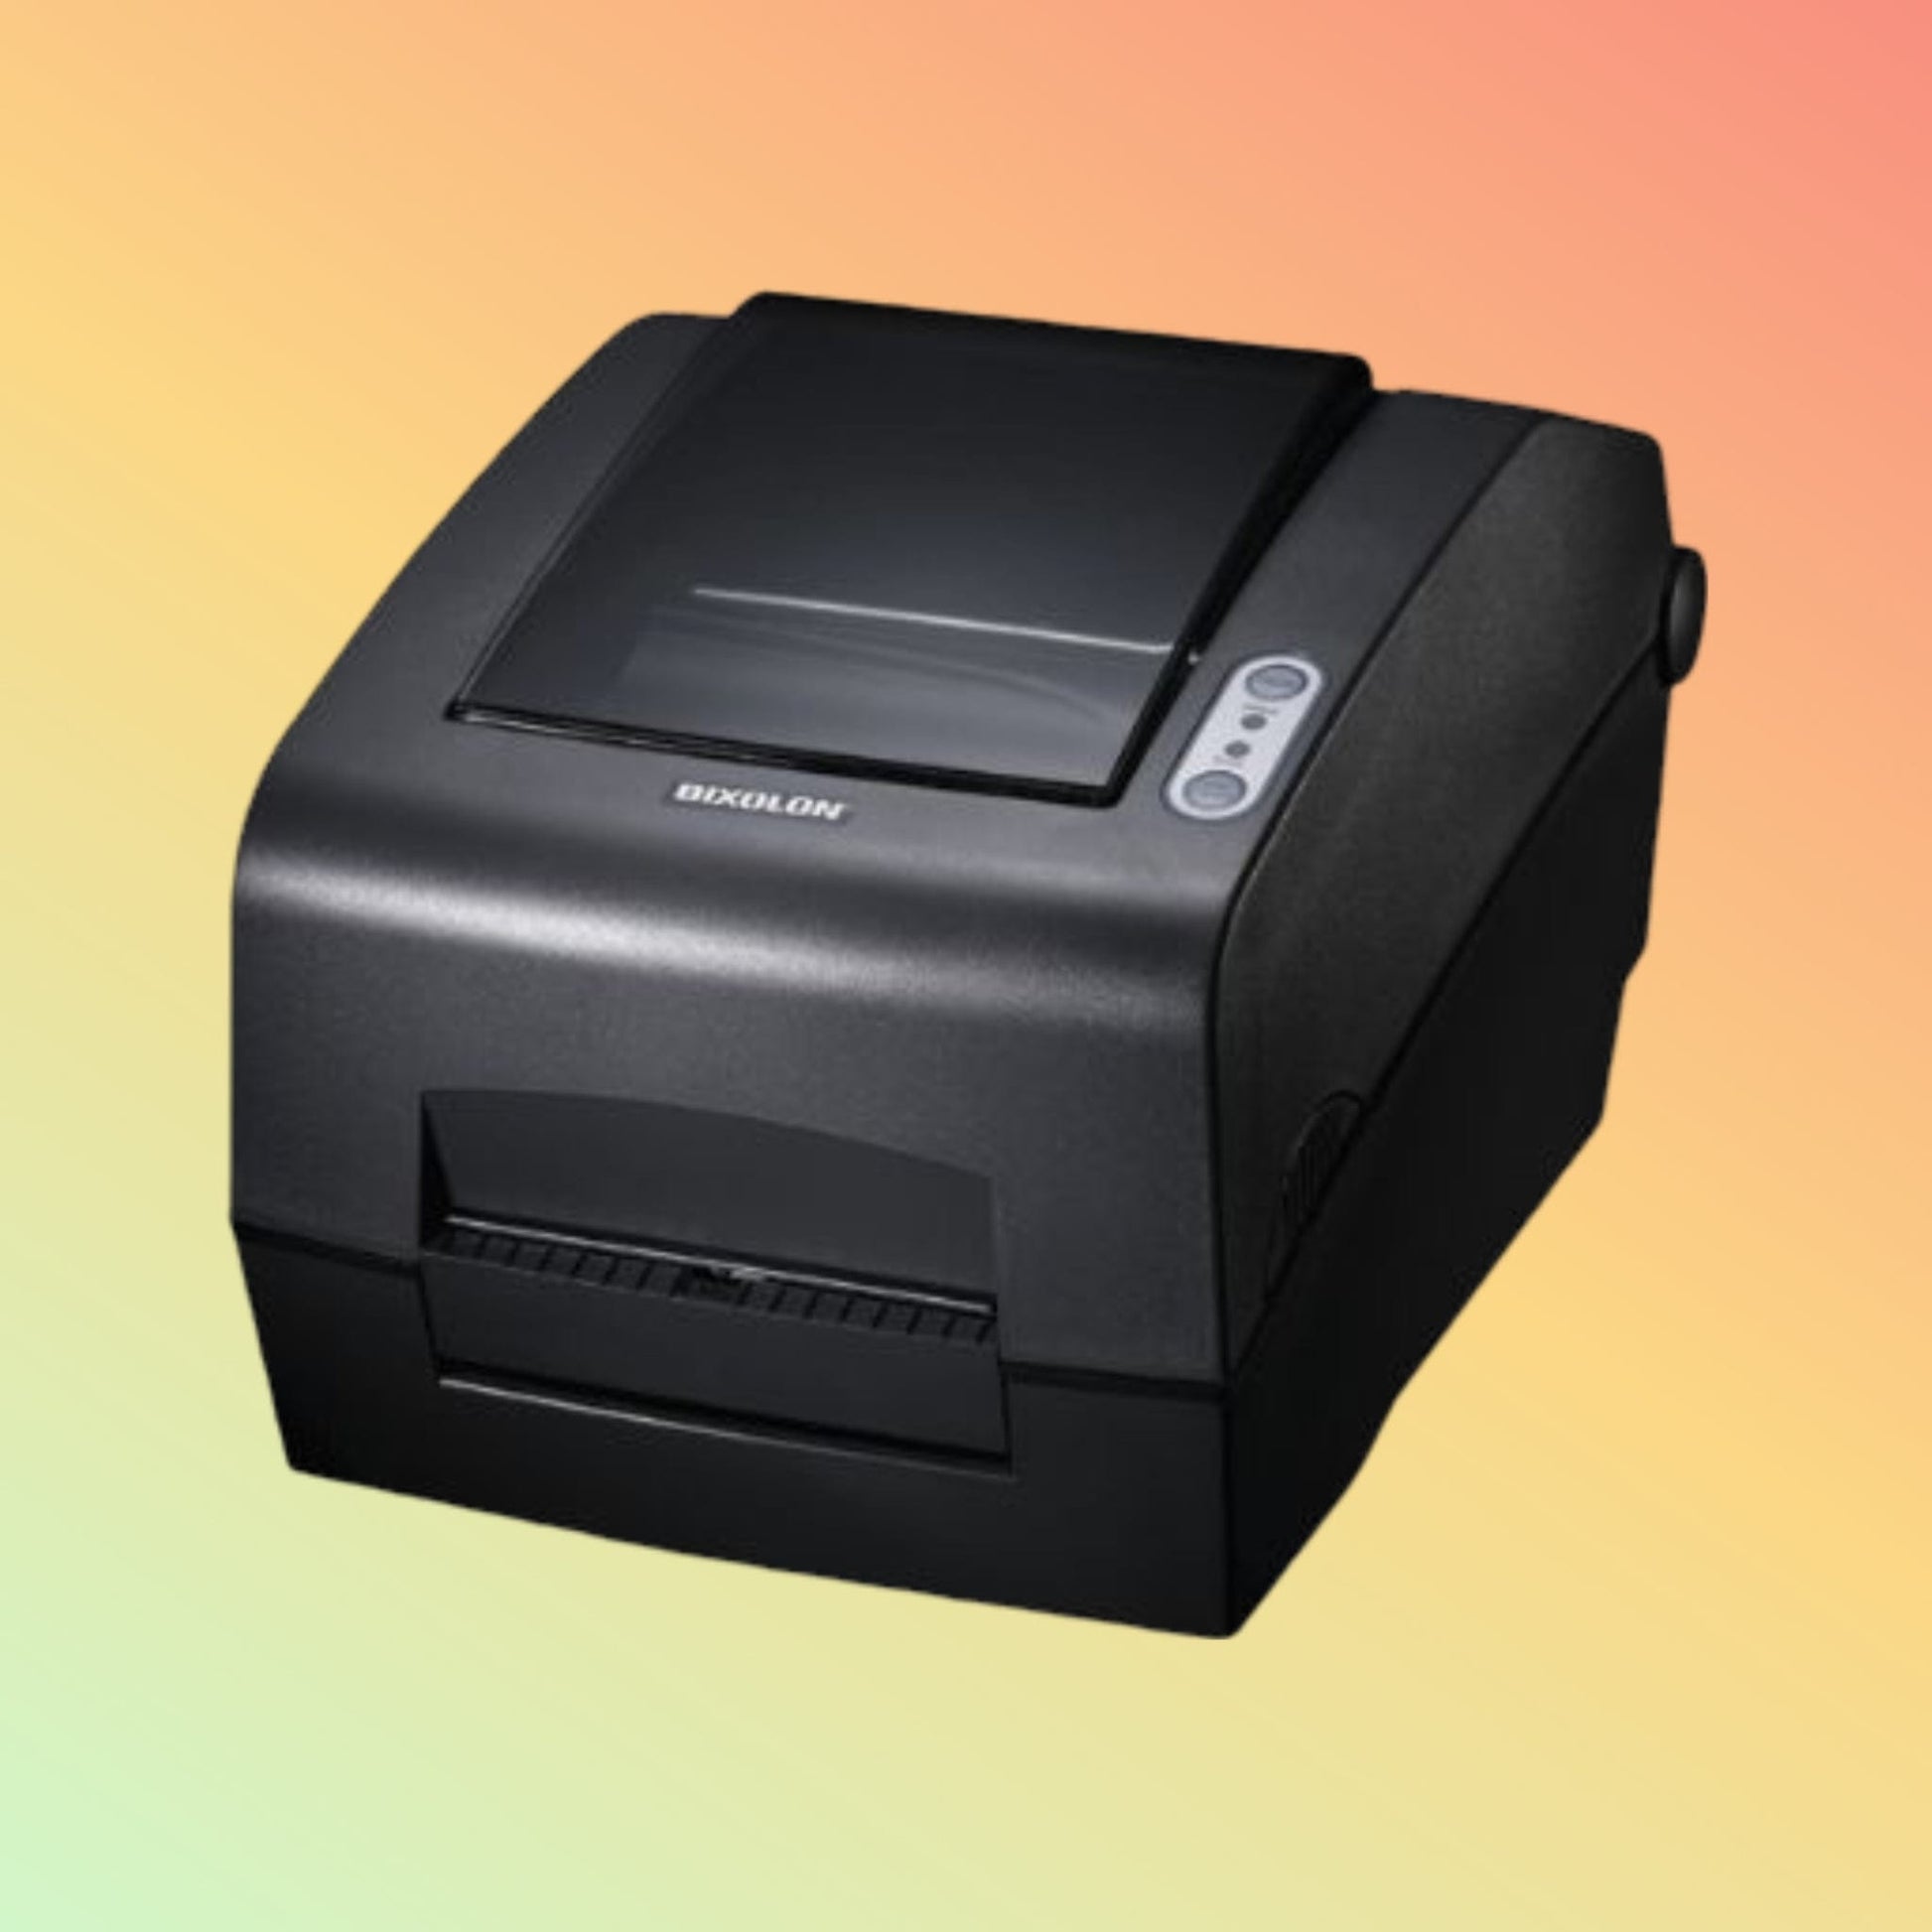 "Fast 6 ips BIXOLON SLP-T400 barcode printer with universal connectivity, supports intricate QR and Data Matrix codes for tracking."